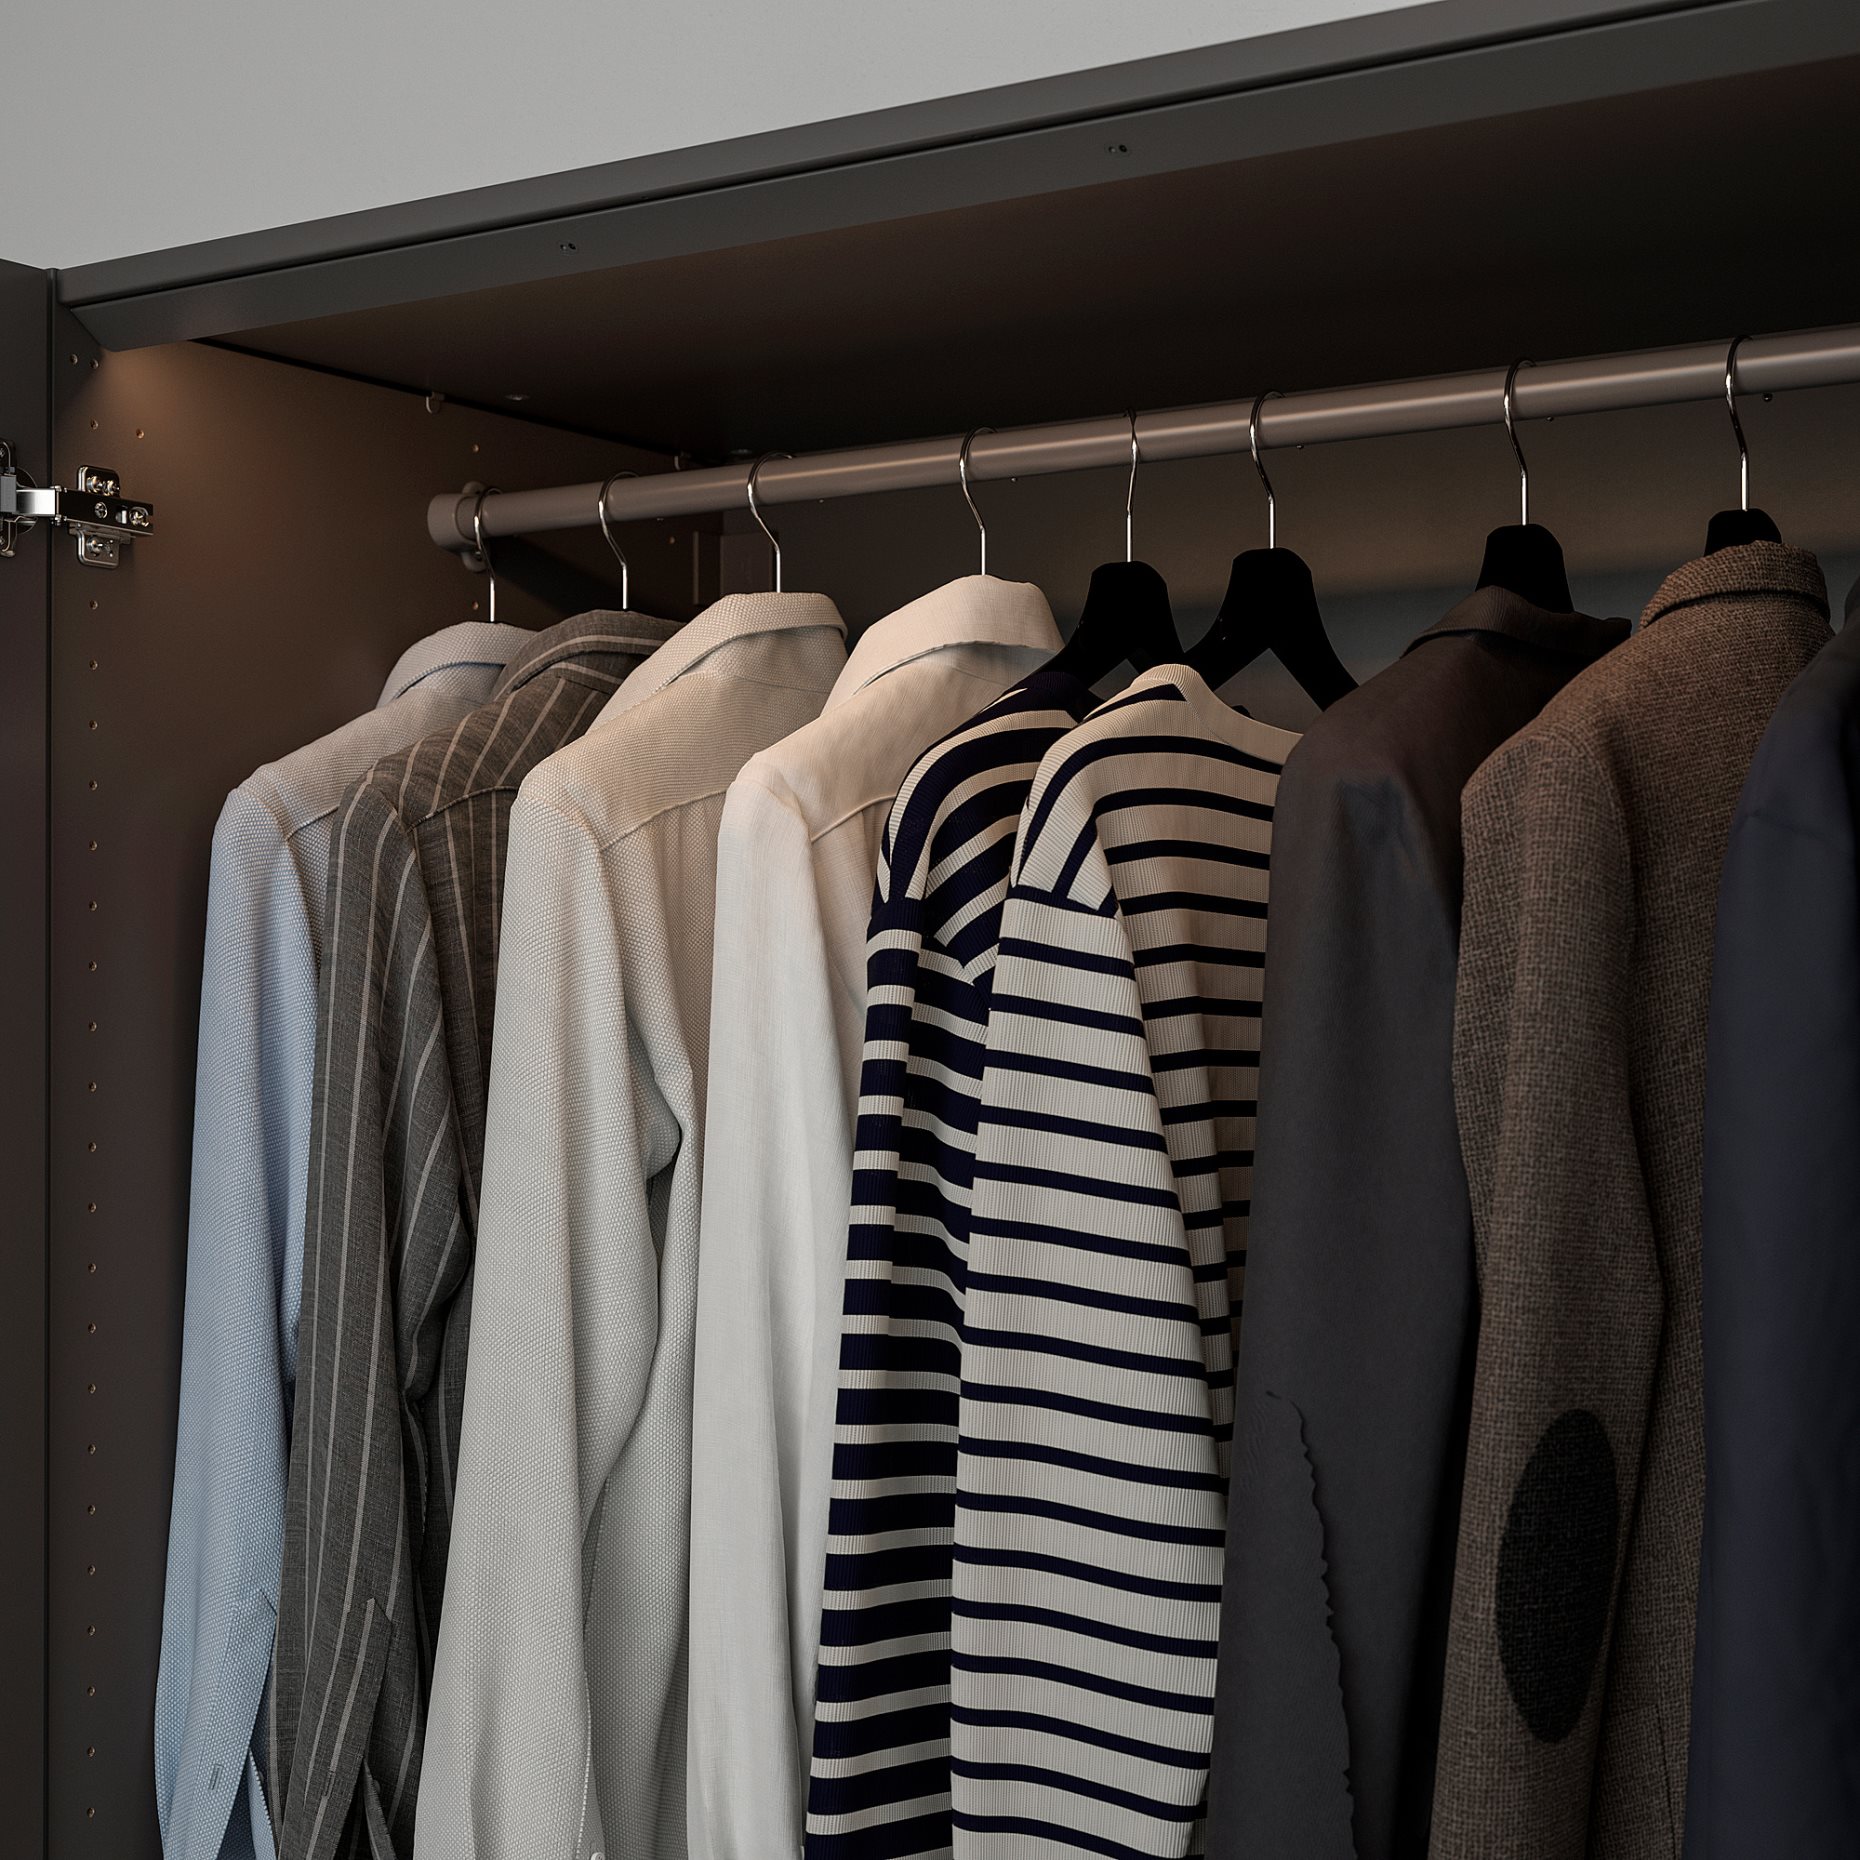 ÖVERSIDAN, wardrobe strip with built-in LED light source and sensor dimmable, 96 cm, 004.749.04